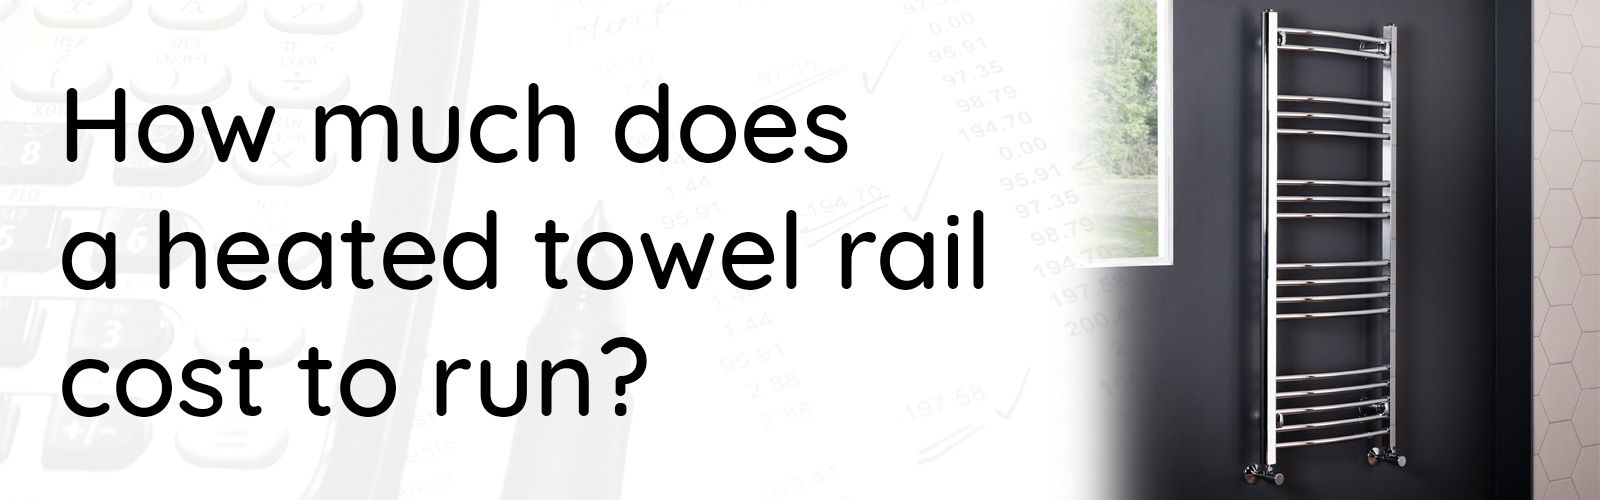 How Much Does A Heated Towel Rail Cost To Run? 